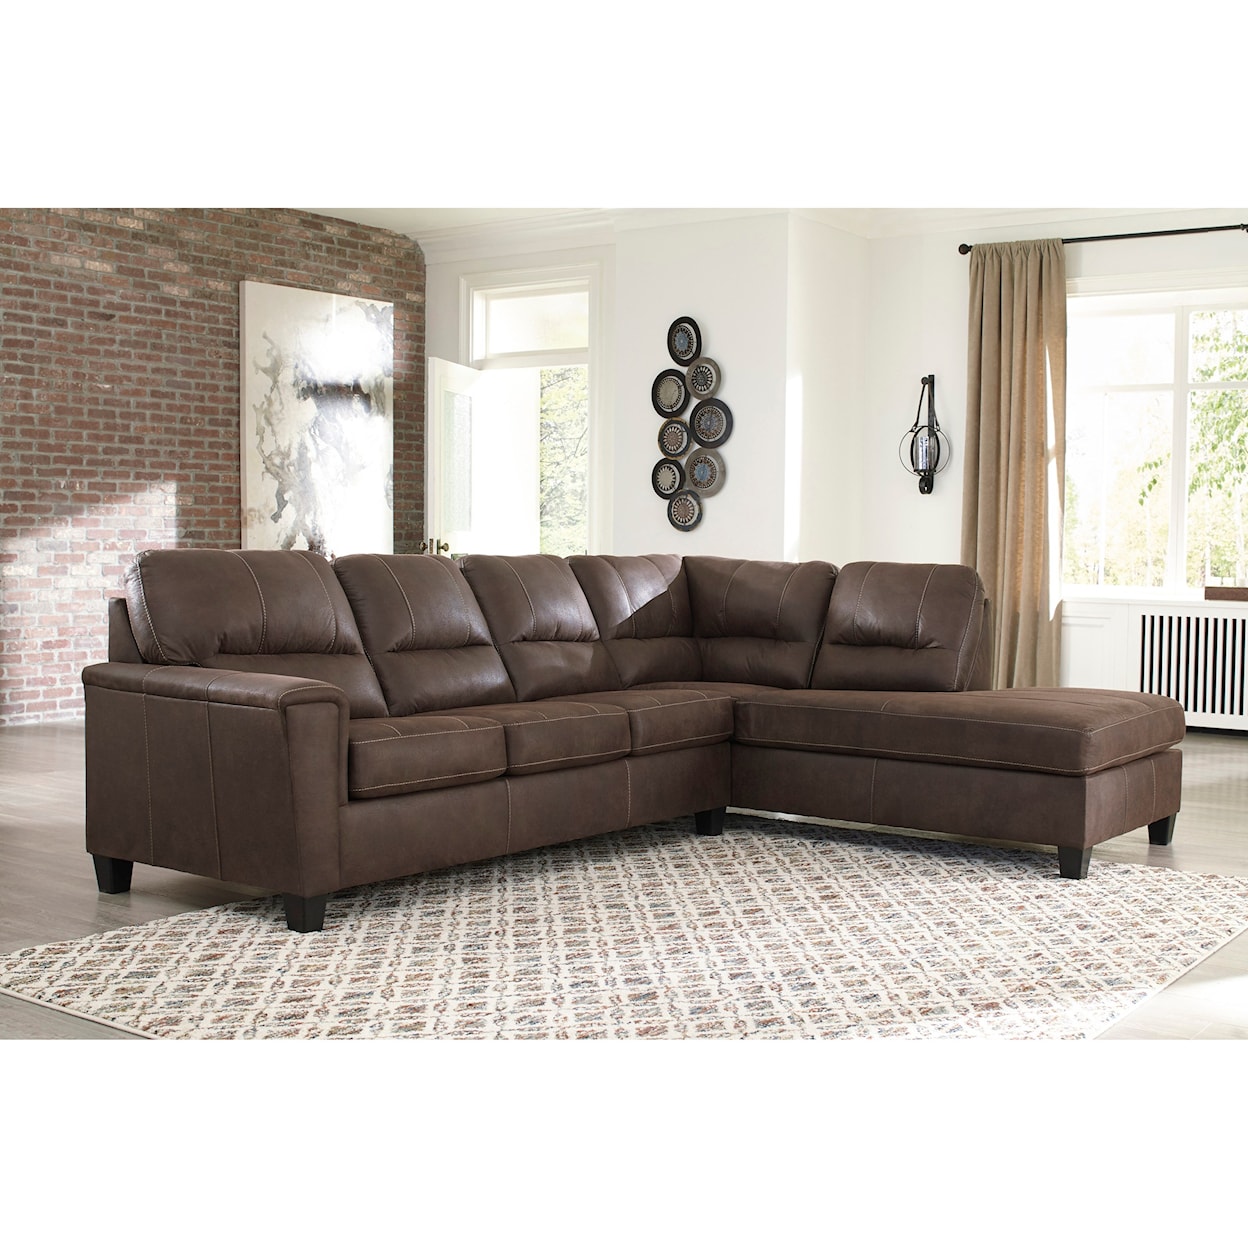 Signature Nash Chestnut 2-Piece Sectional with Right Chaise